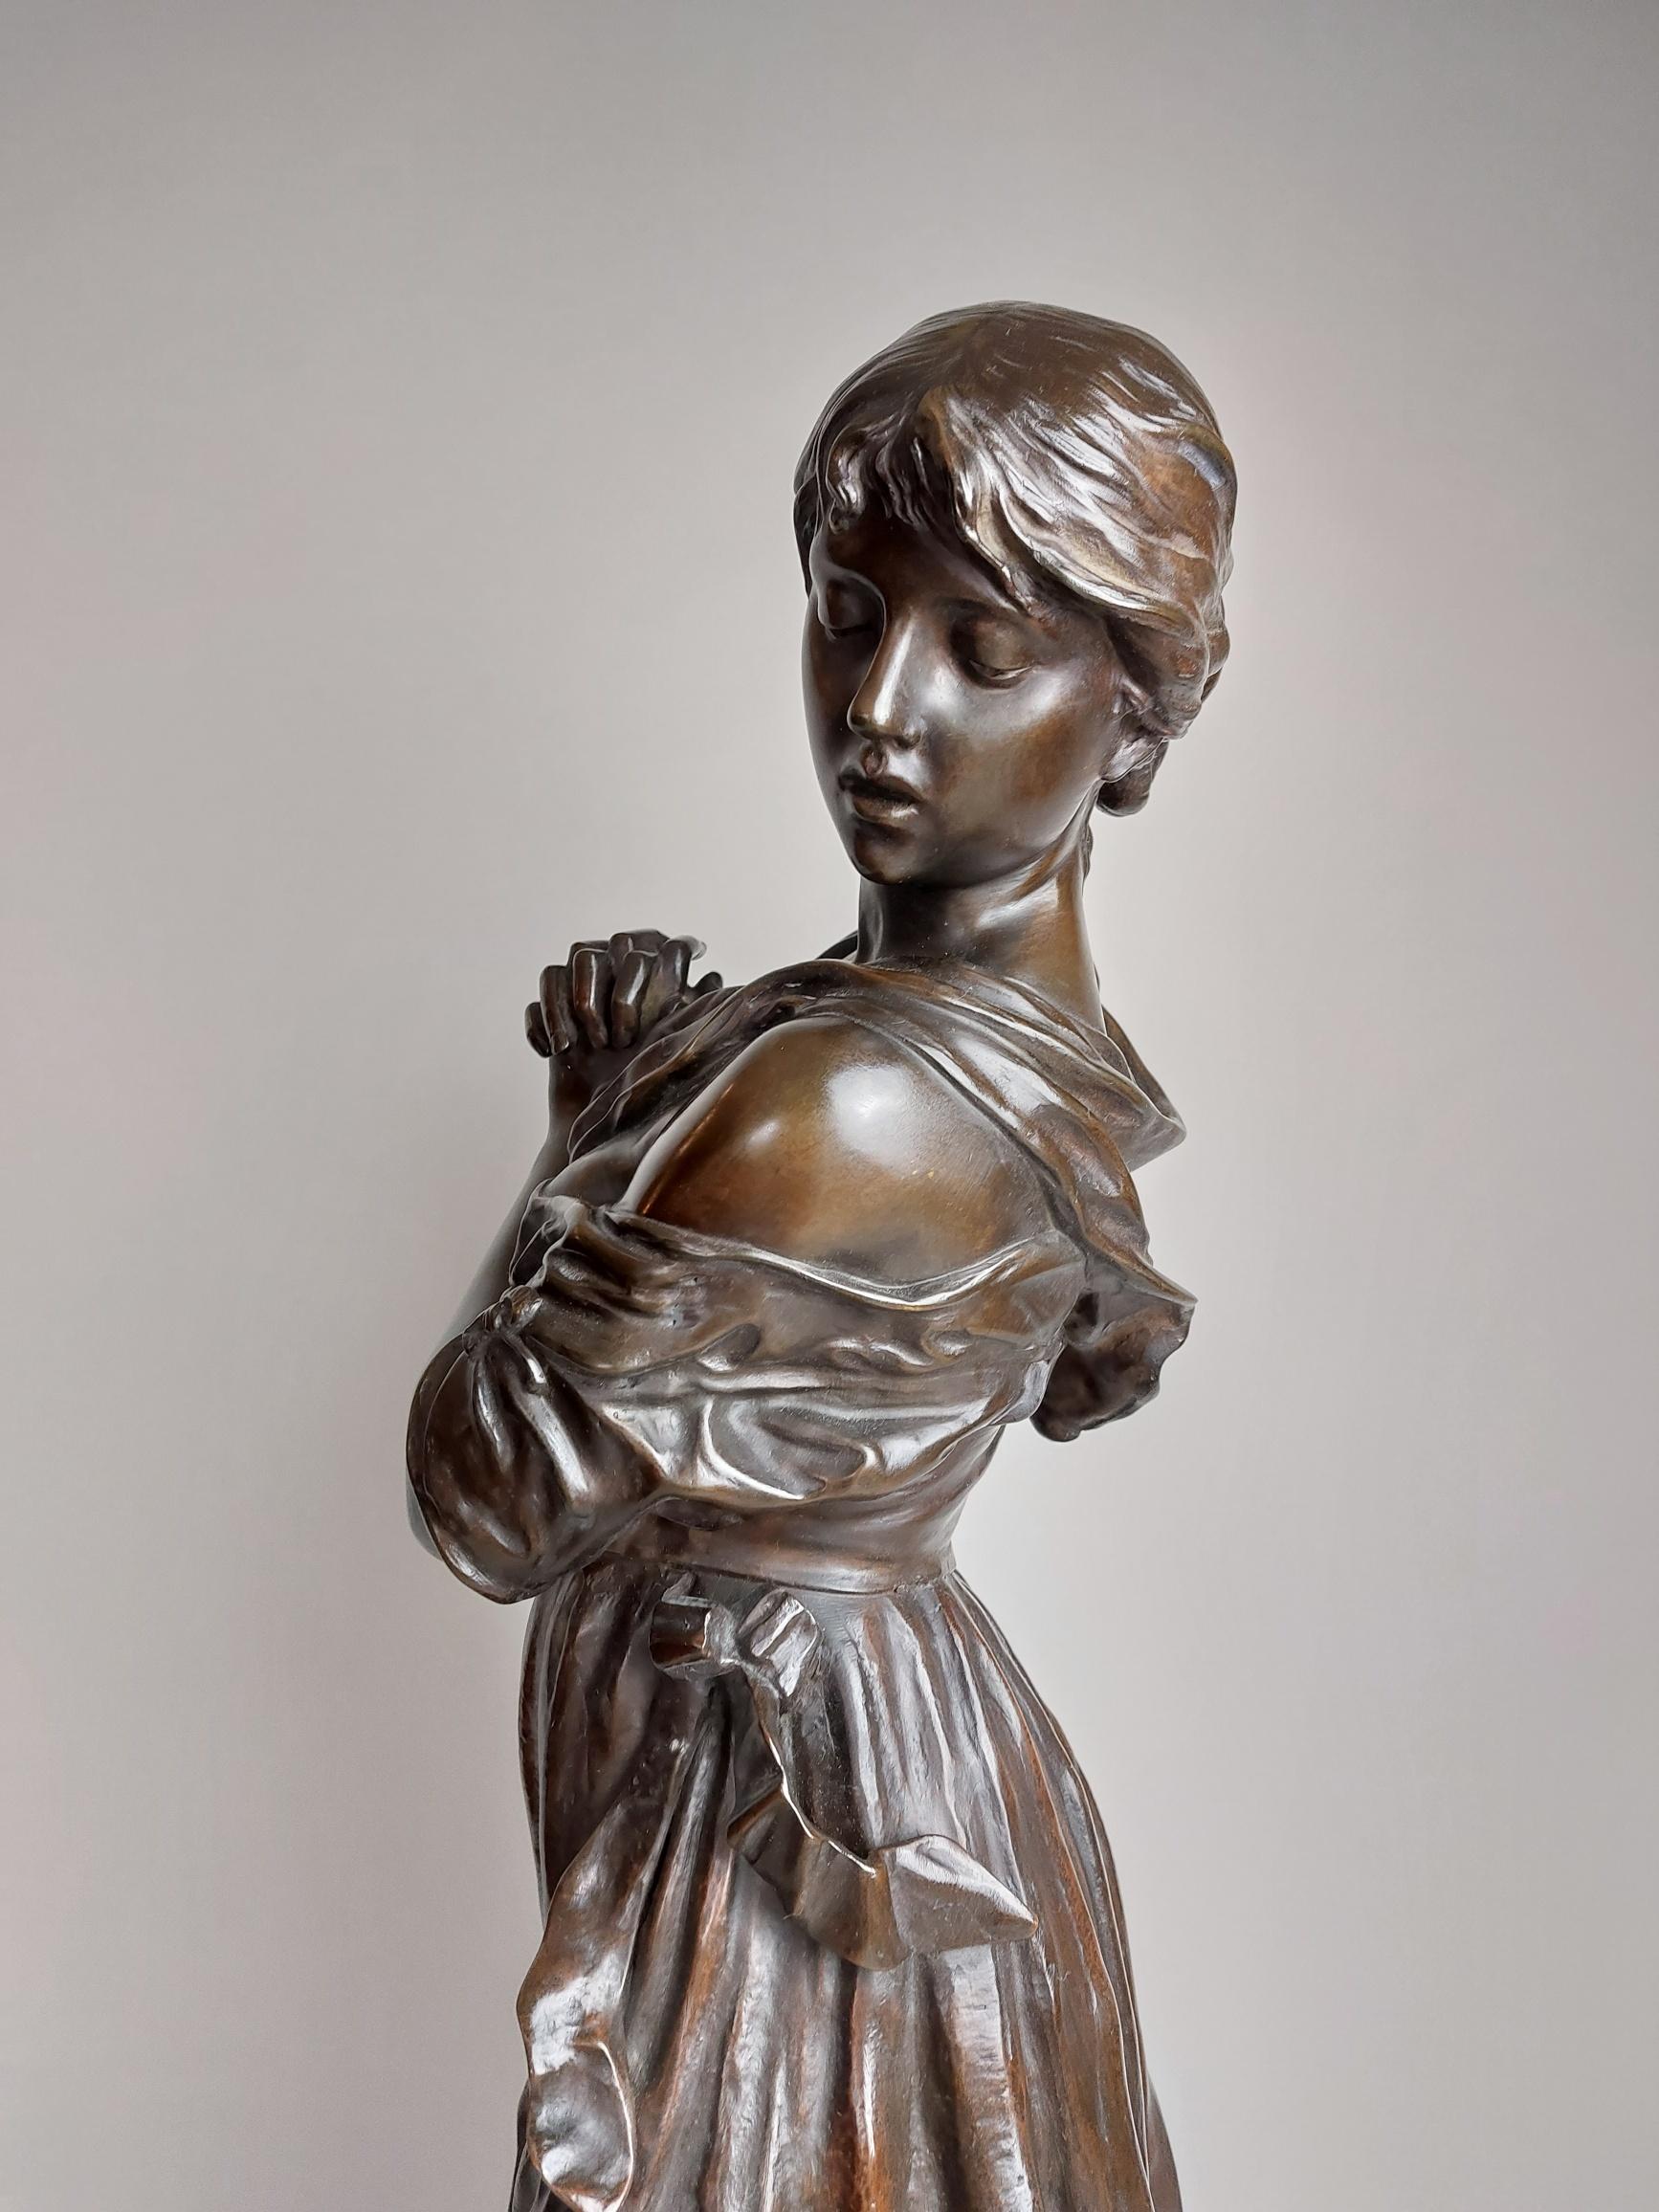 An elegant 19th century bronze of a barefoot peasant girl looking at a pottery jug she has just dropped, the liquid spills out and down the side of the base in an interesting artistic touch.